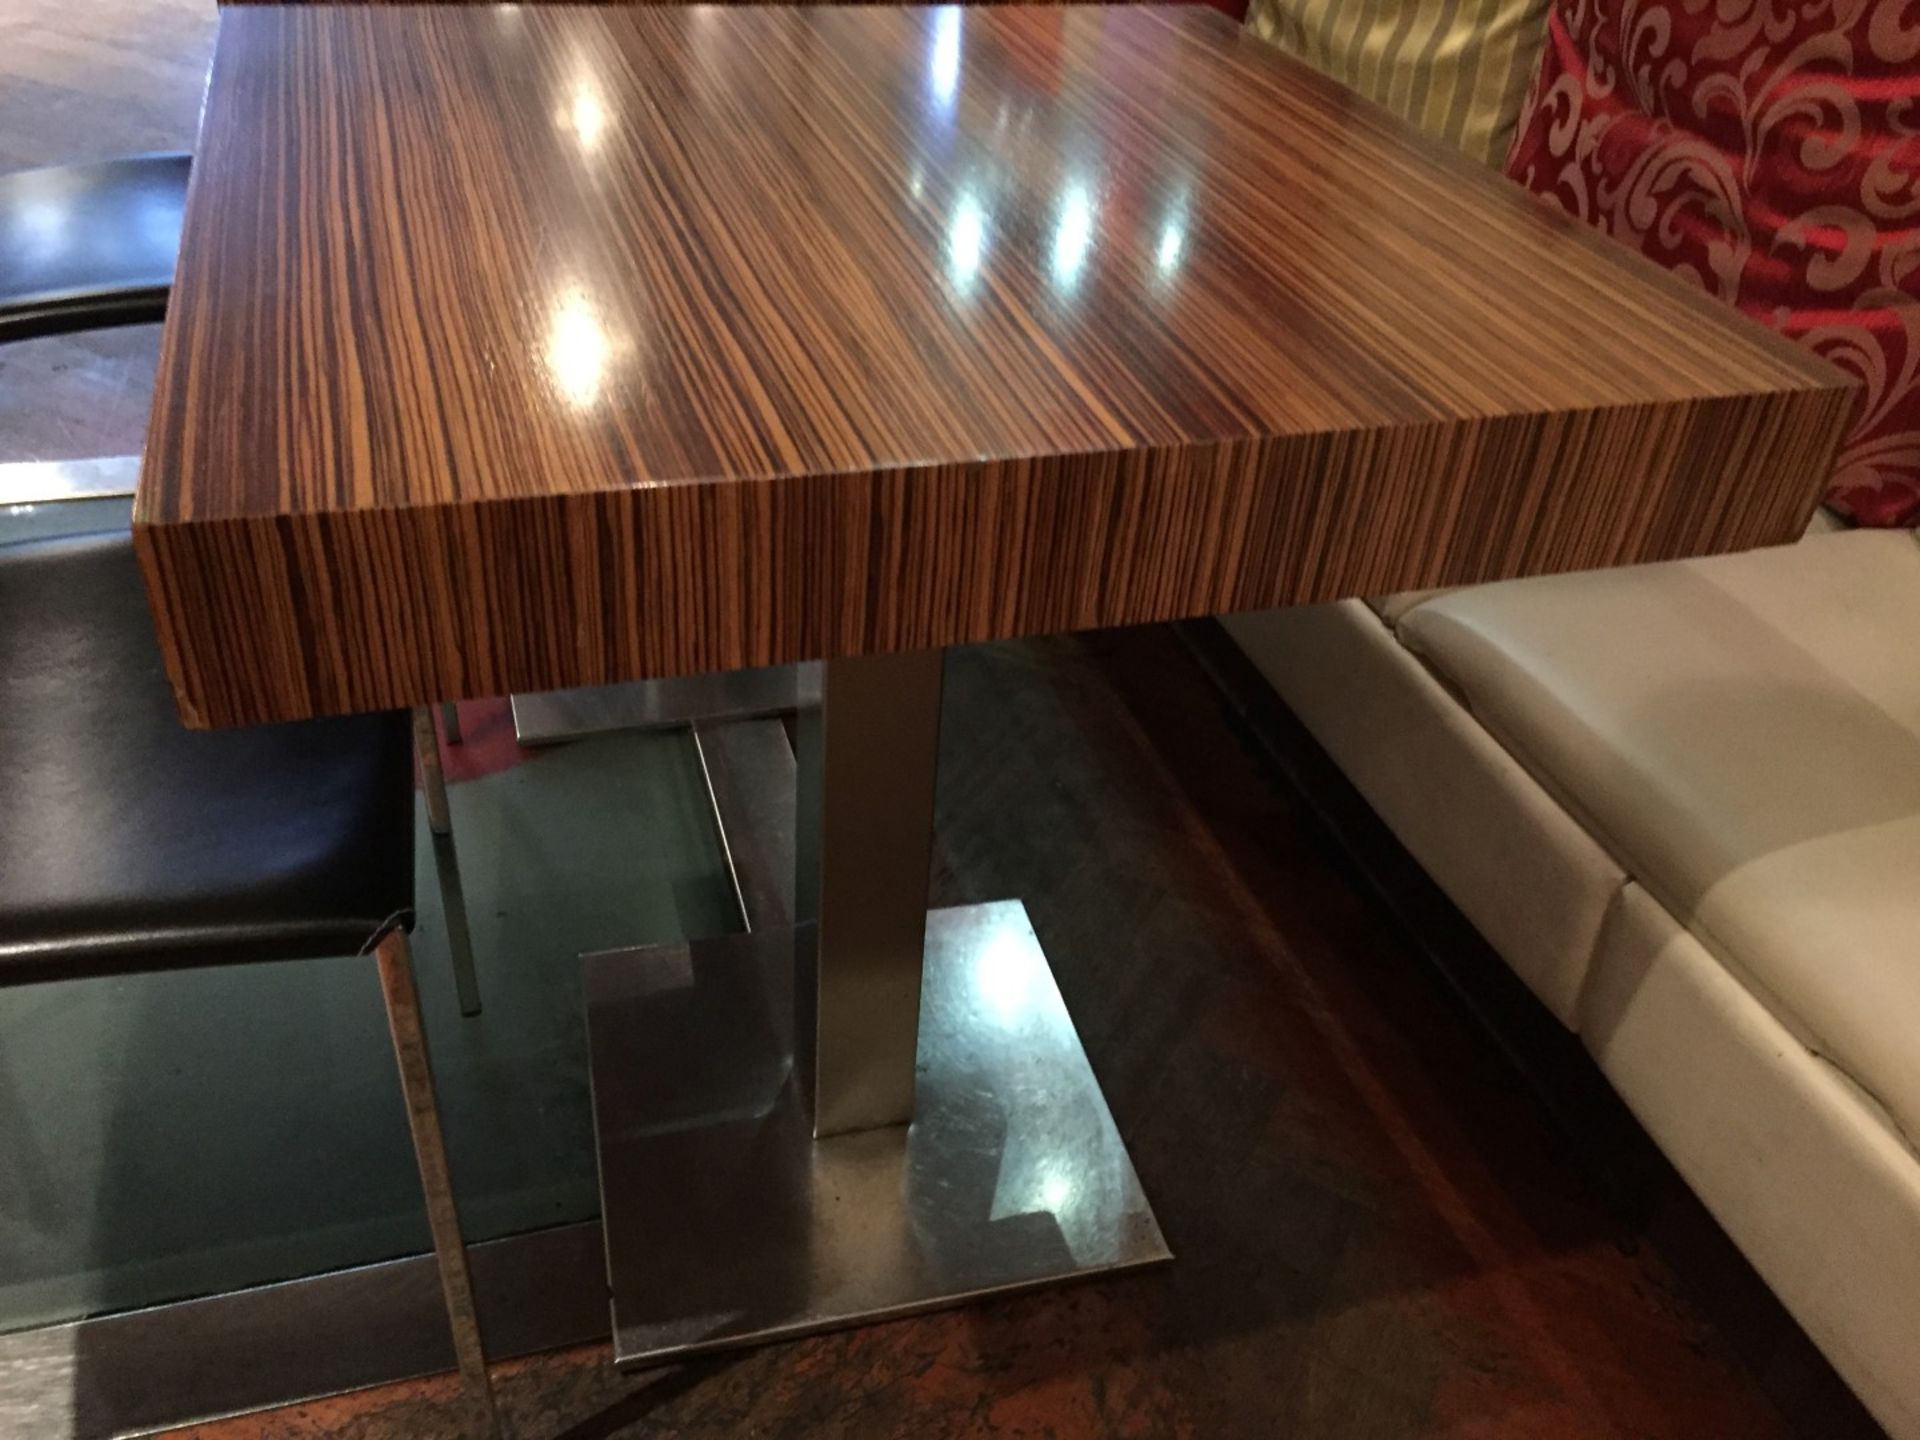 2 x Modern Zebrawood Bistro Tables - Substantial Chrome Base With Zebrawood Tops - H76 x W70 x D70cm - Image 5 of 7